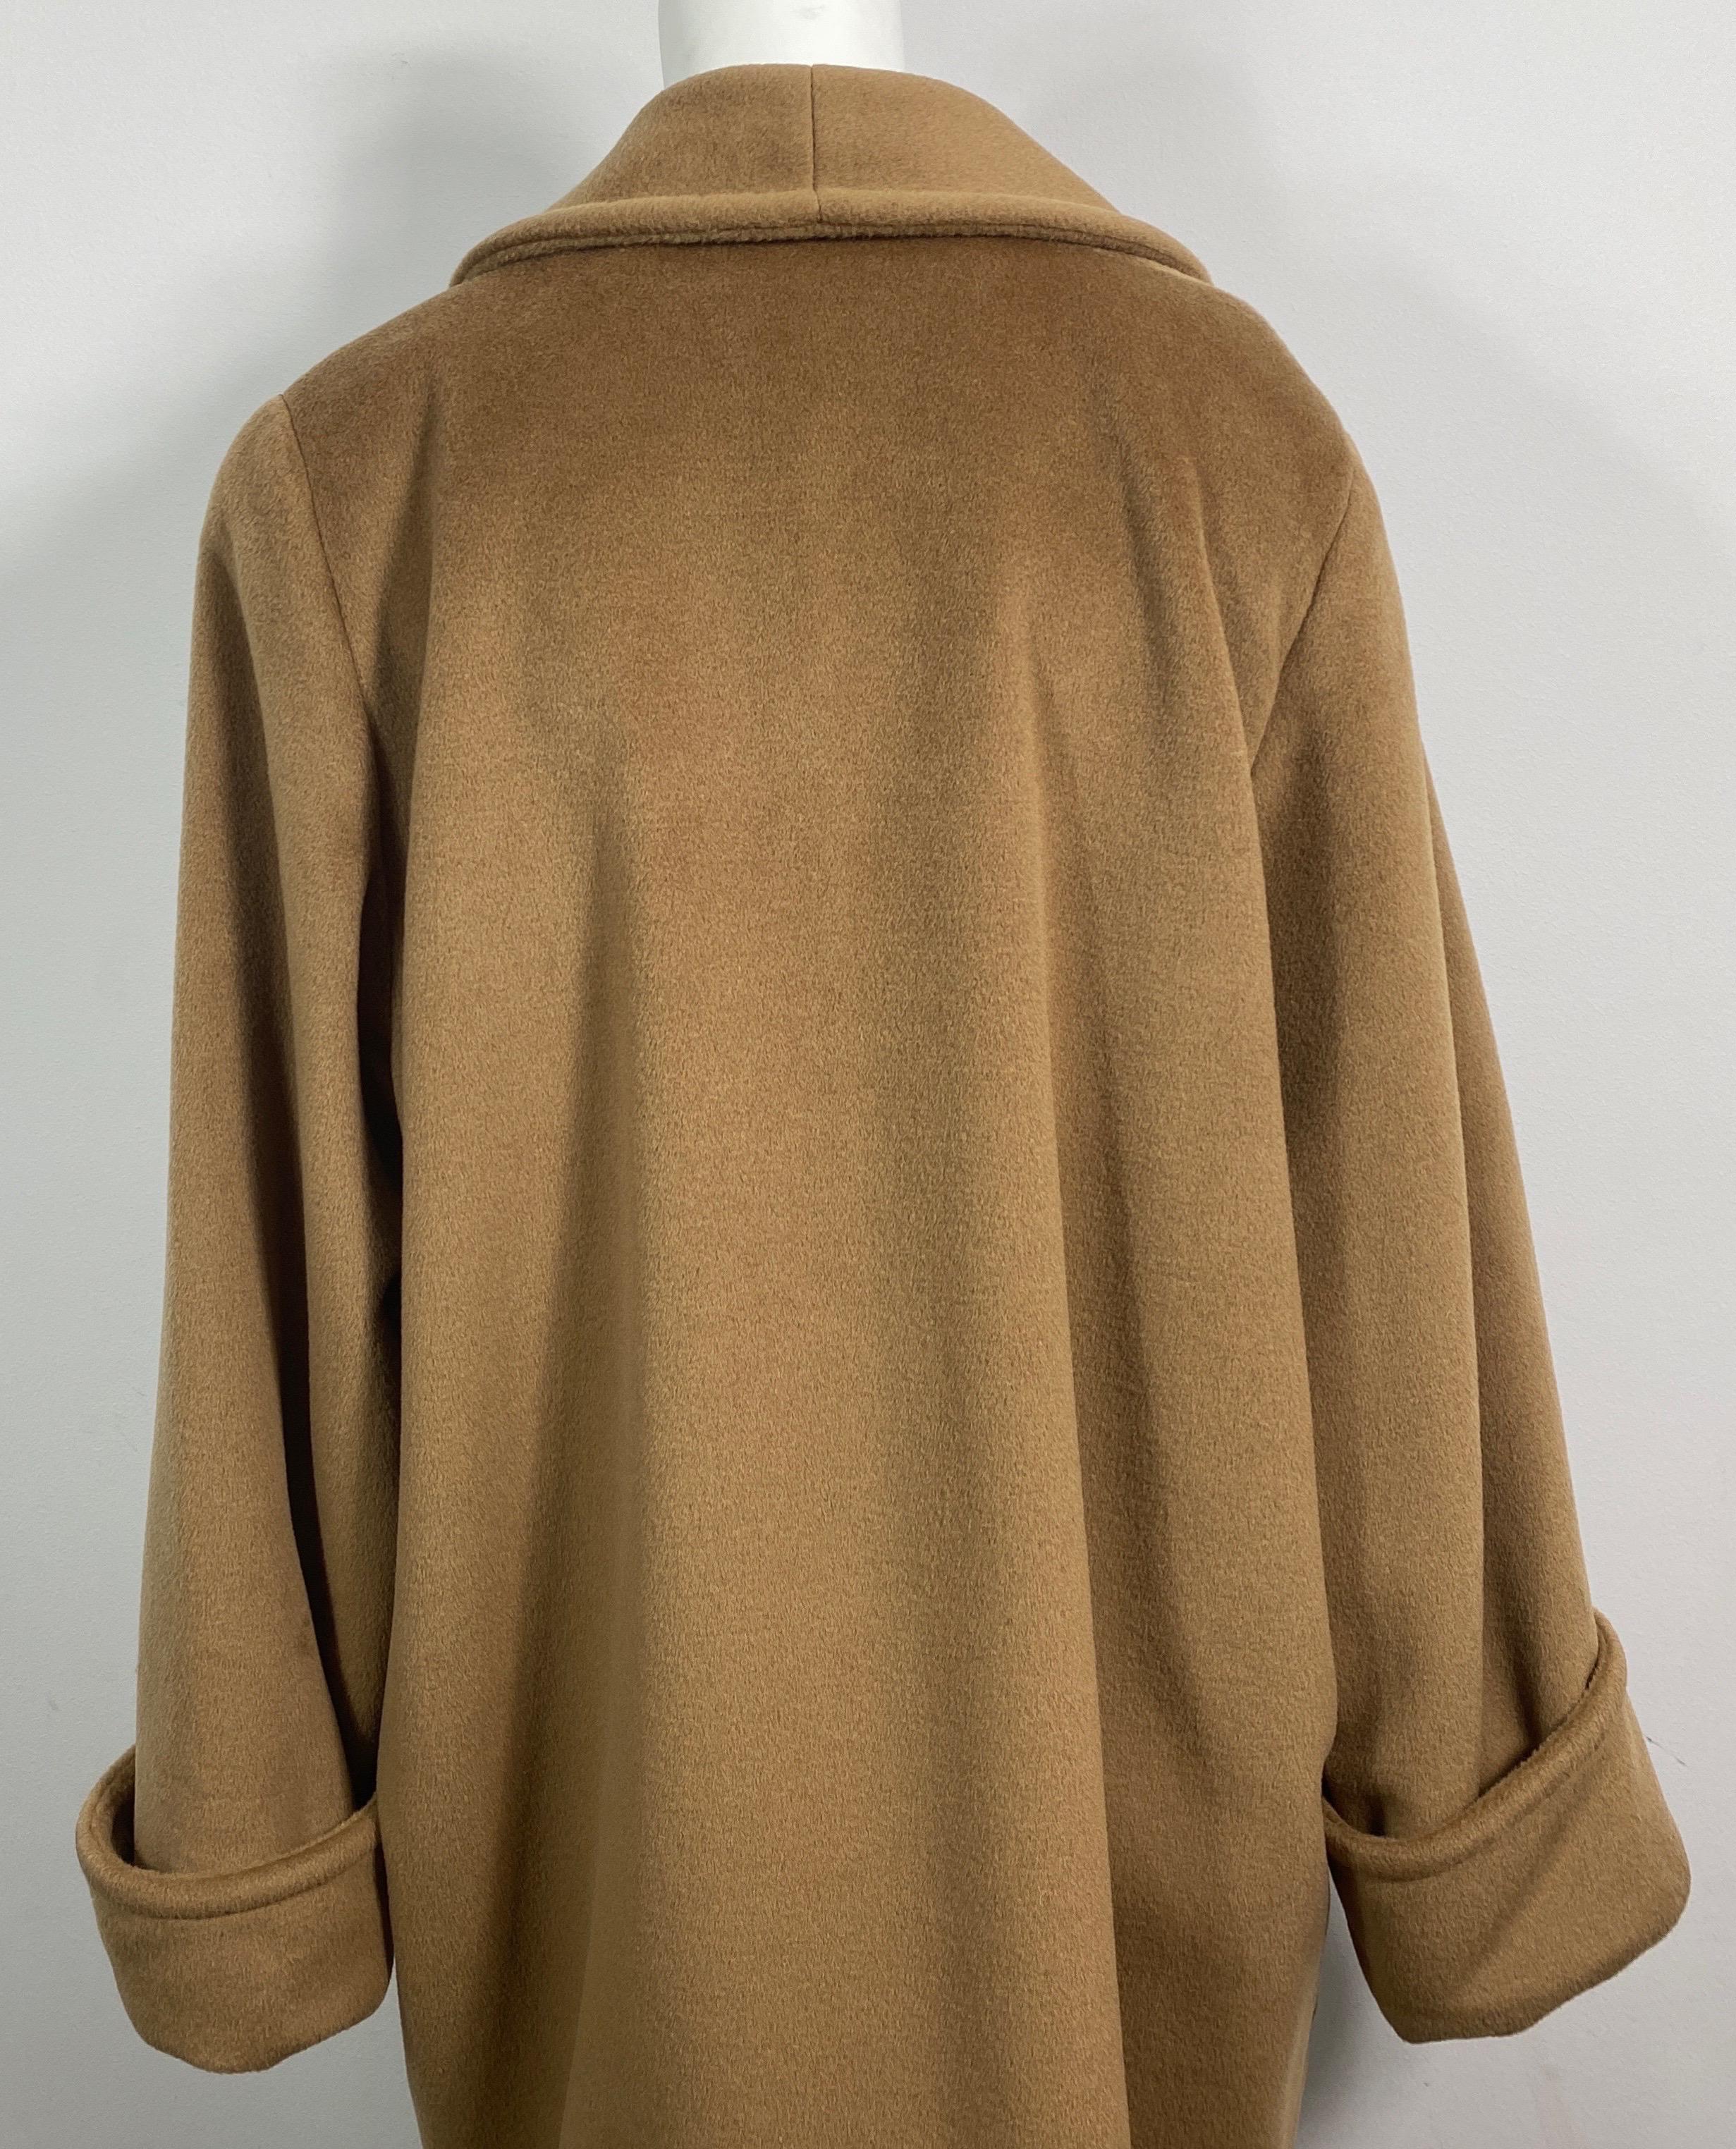 Valentino Boutique 1990’s Double Breasted Tan Cashmere Oversized Coat - Size 10 For Sale 9